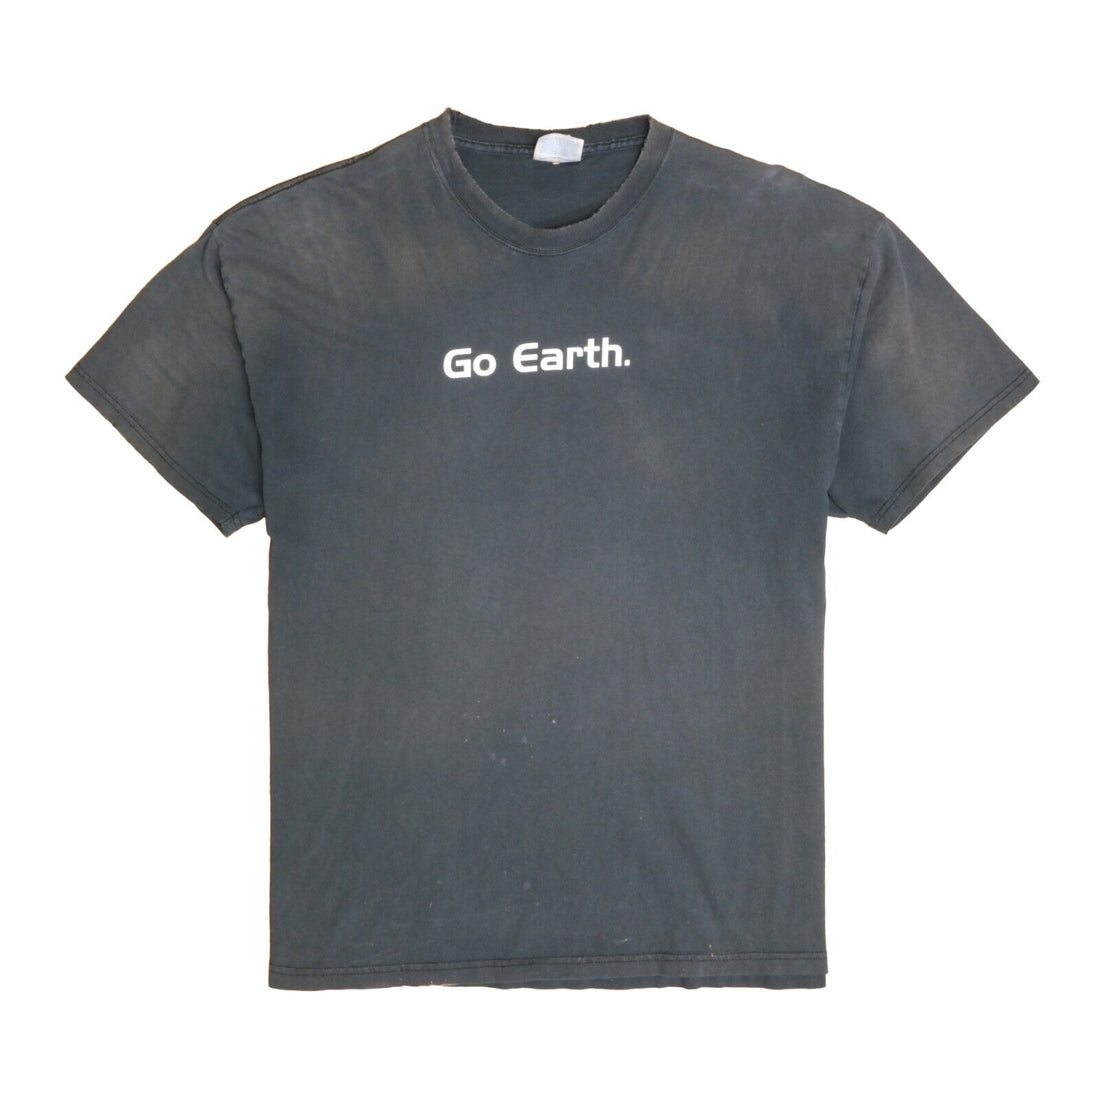 Vintage Halo 2 Go Earth T-Shirt Size XL Xbox Videogame Tee